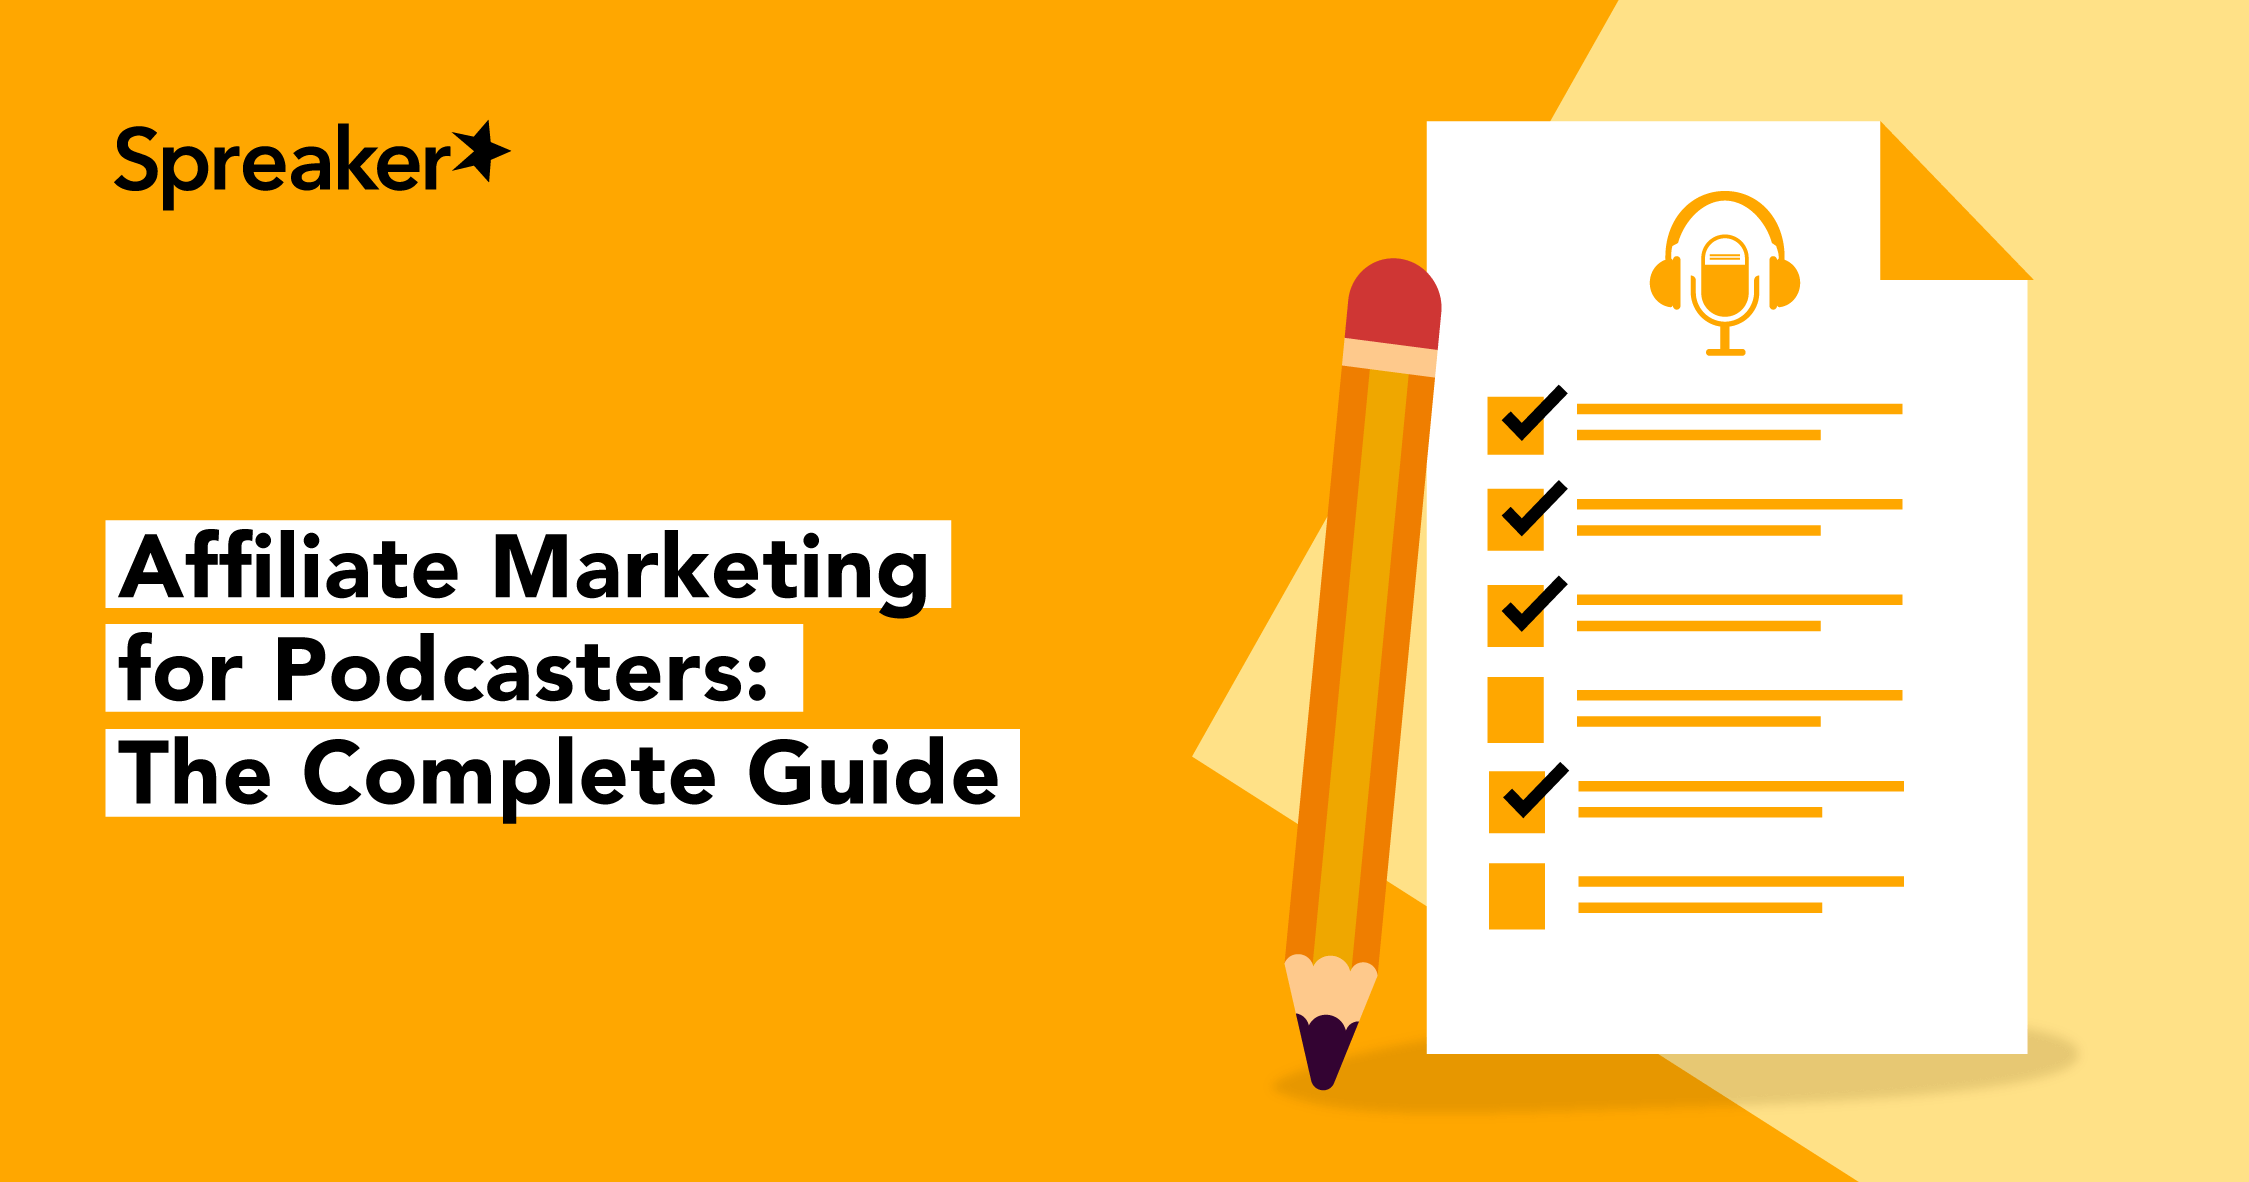 Affiliate Marketing for Podcasters: The Complete Guide - Spreaker Blog